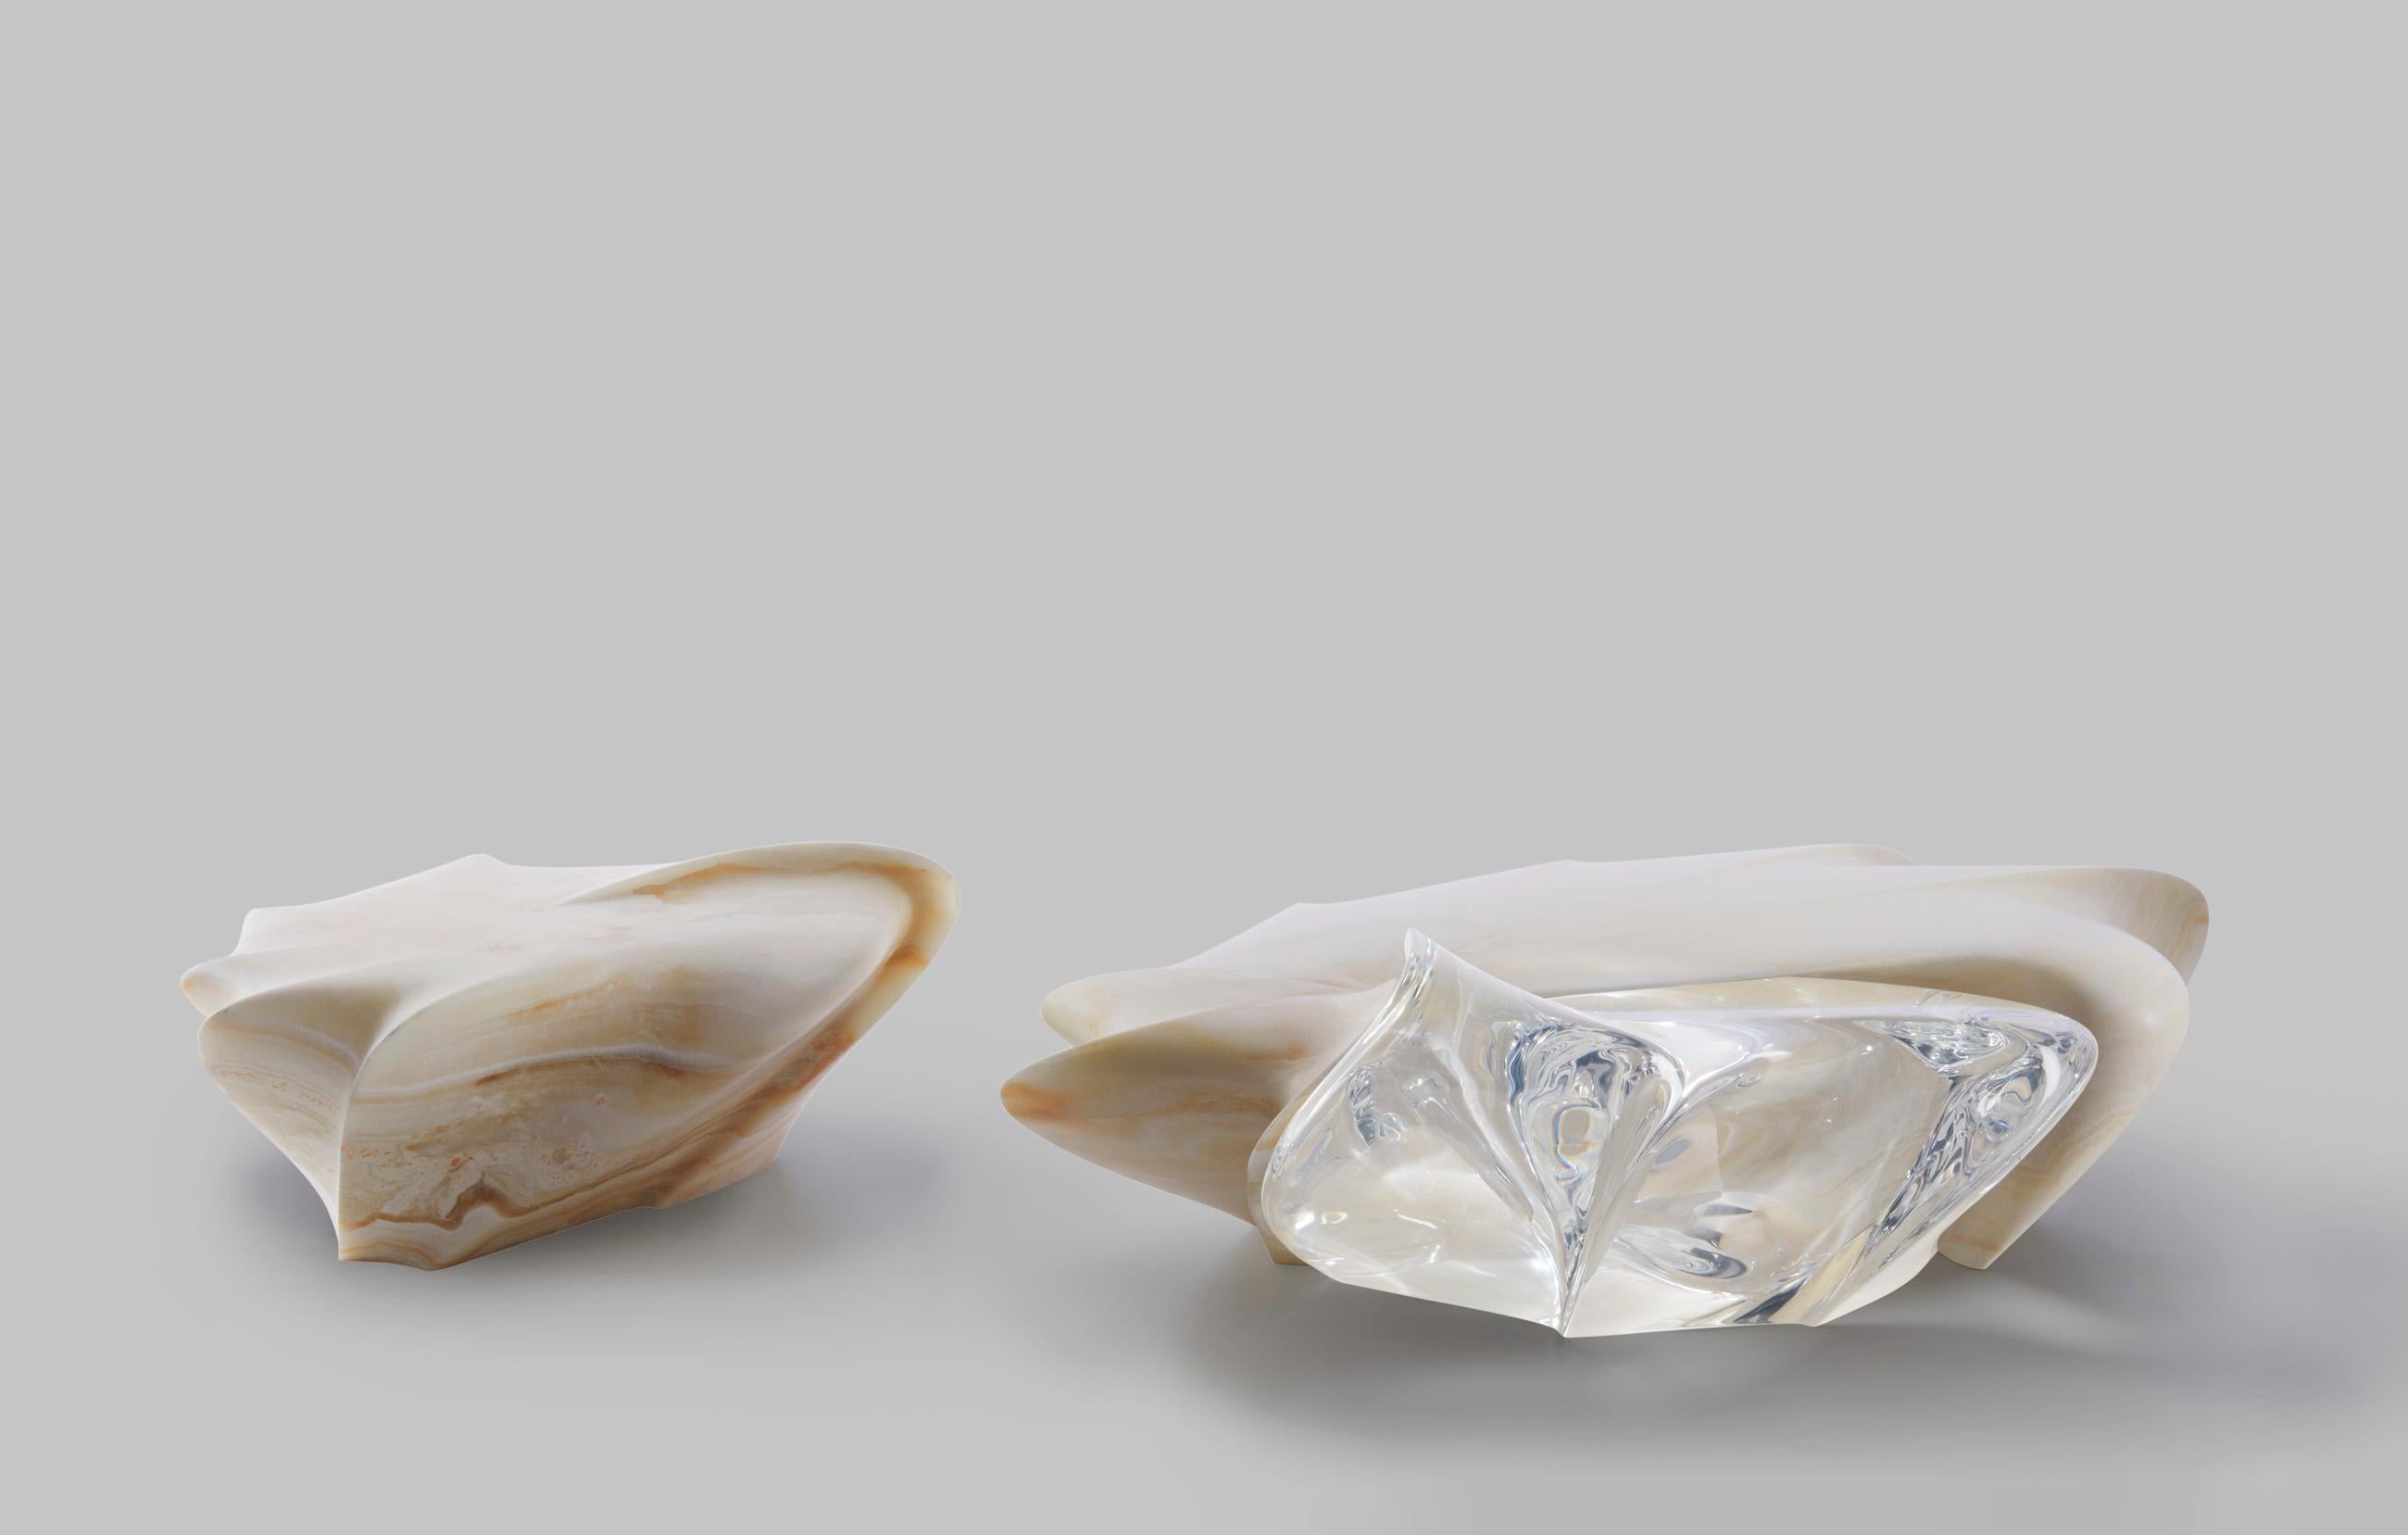 Created in a limited edition, this statement piece in honed Ivory Onyx was designed by Zaha Hadid in collaboration with our partners in Italy. Mirroring the logic and coherence of nature, the design references the spiraling motif of seashells. Malea